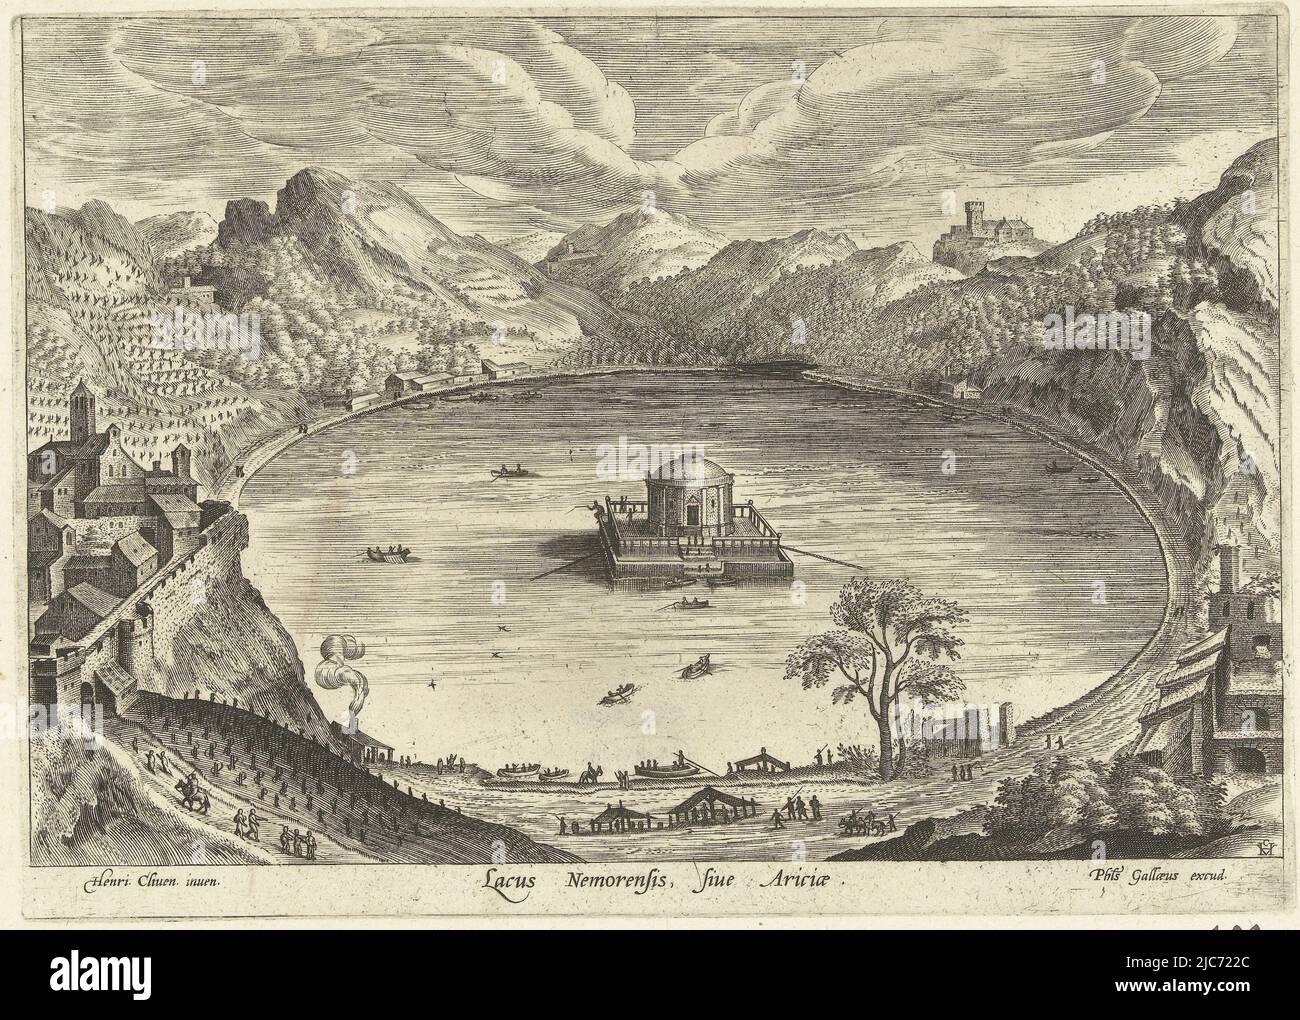 View of Lake Nemi with a temple in the middle of the lake. Several ships on the lake. The print is part of a series depicting various places in the Mediterranean, View of Lake Nemi Lacus Nemorensis, sive Ariciae Ruinarum varii prospectus , Hendrick van Cleve, (mentioned on object), print maker: anonymous, publisher: Philips Galle, (mentioned on object), Antwerp, print maker: Antwerp, publisher: Haarlem, 1585, paper, engraving, h 175 mm × w 244 mm Stock Photo